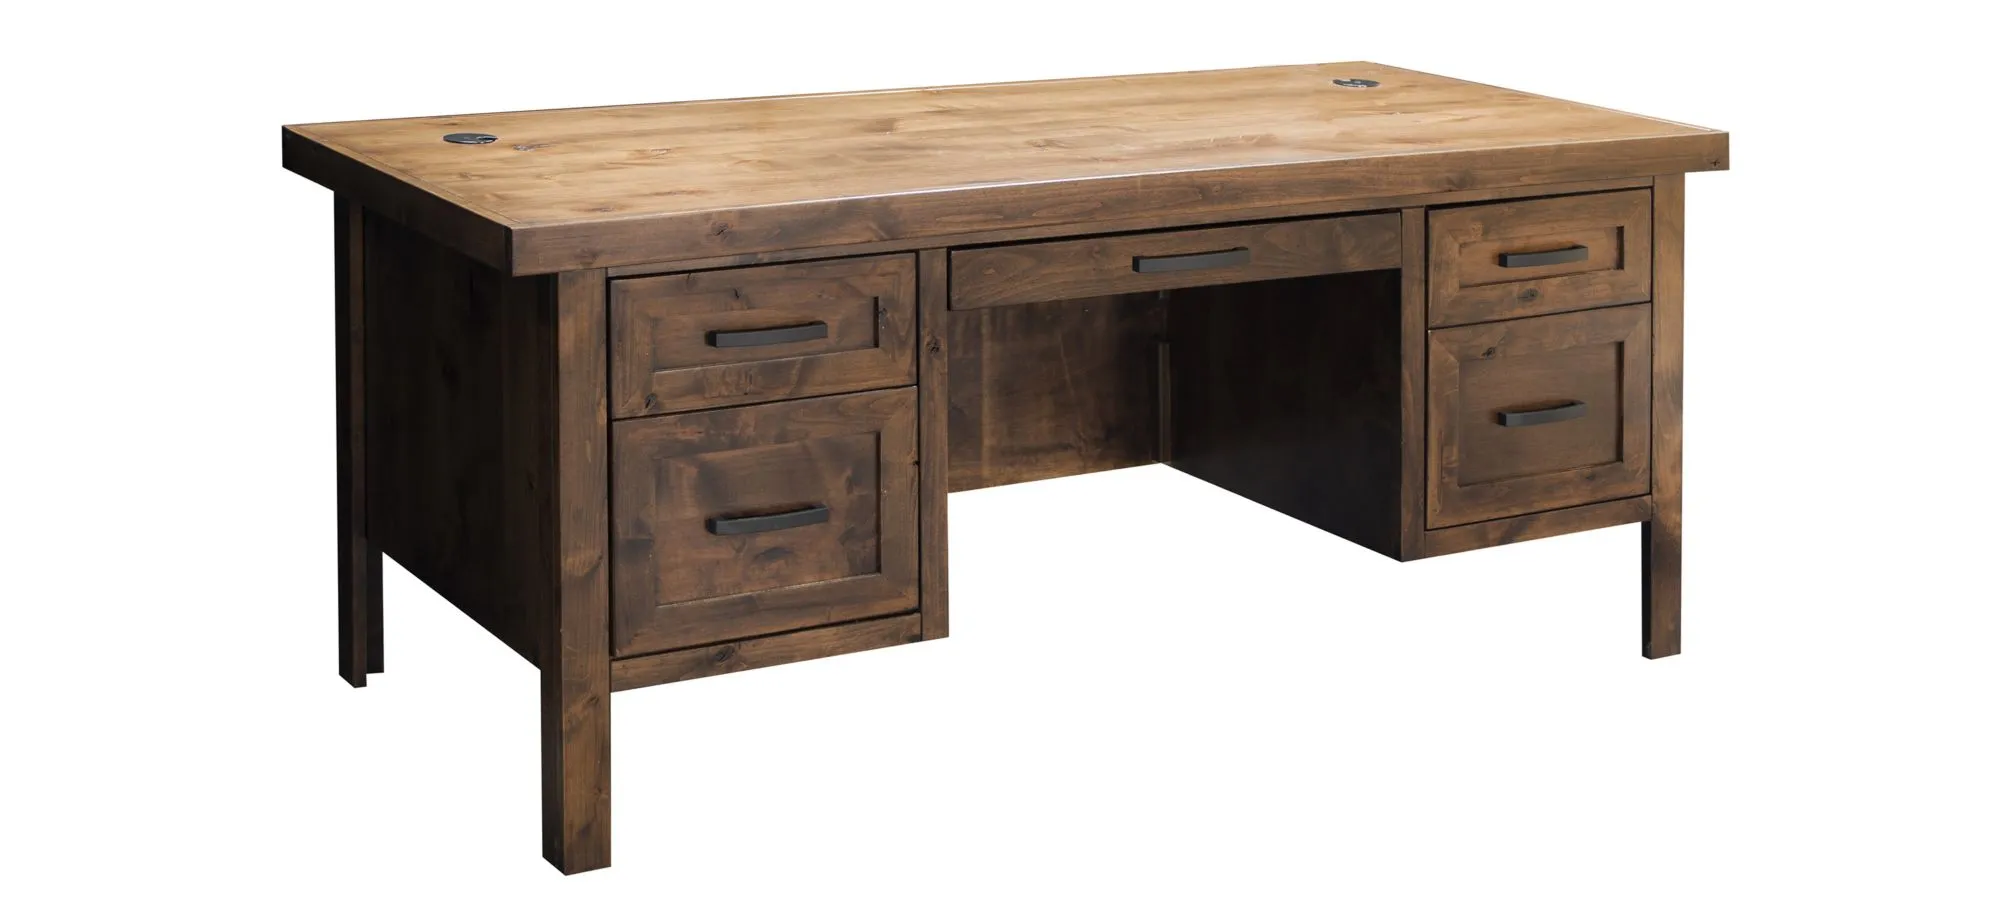 Sausalito Writing Desk w/ Drawers in Whiskey by Legends Furniture